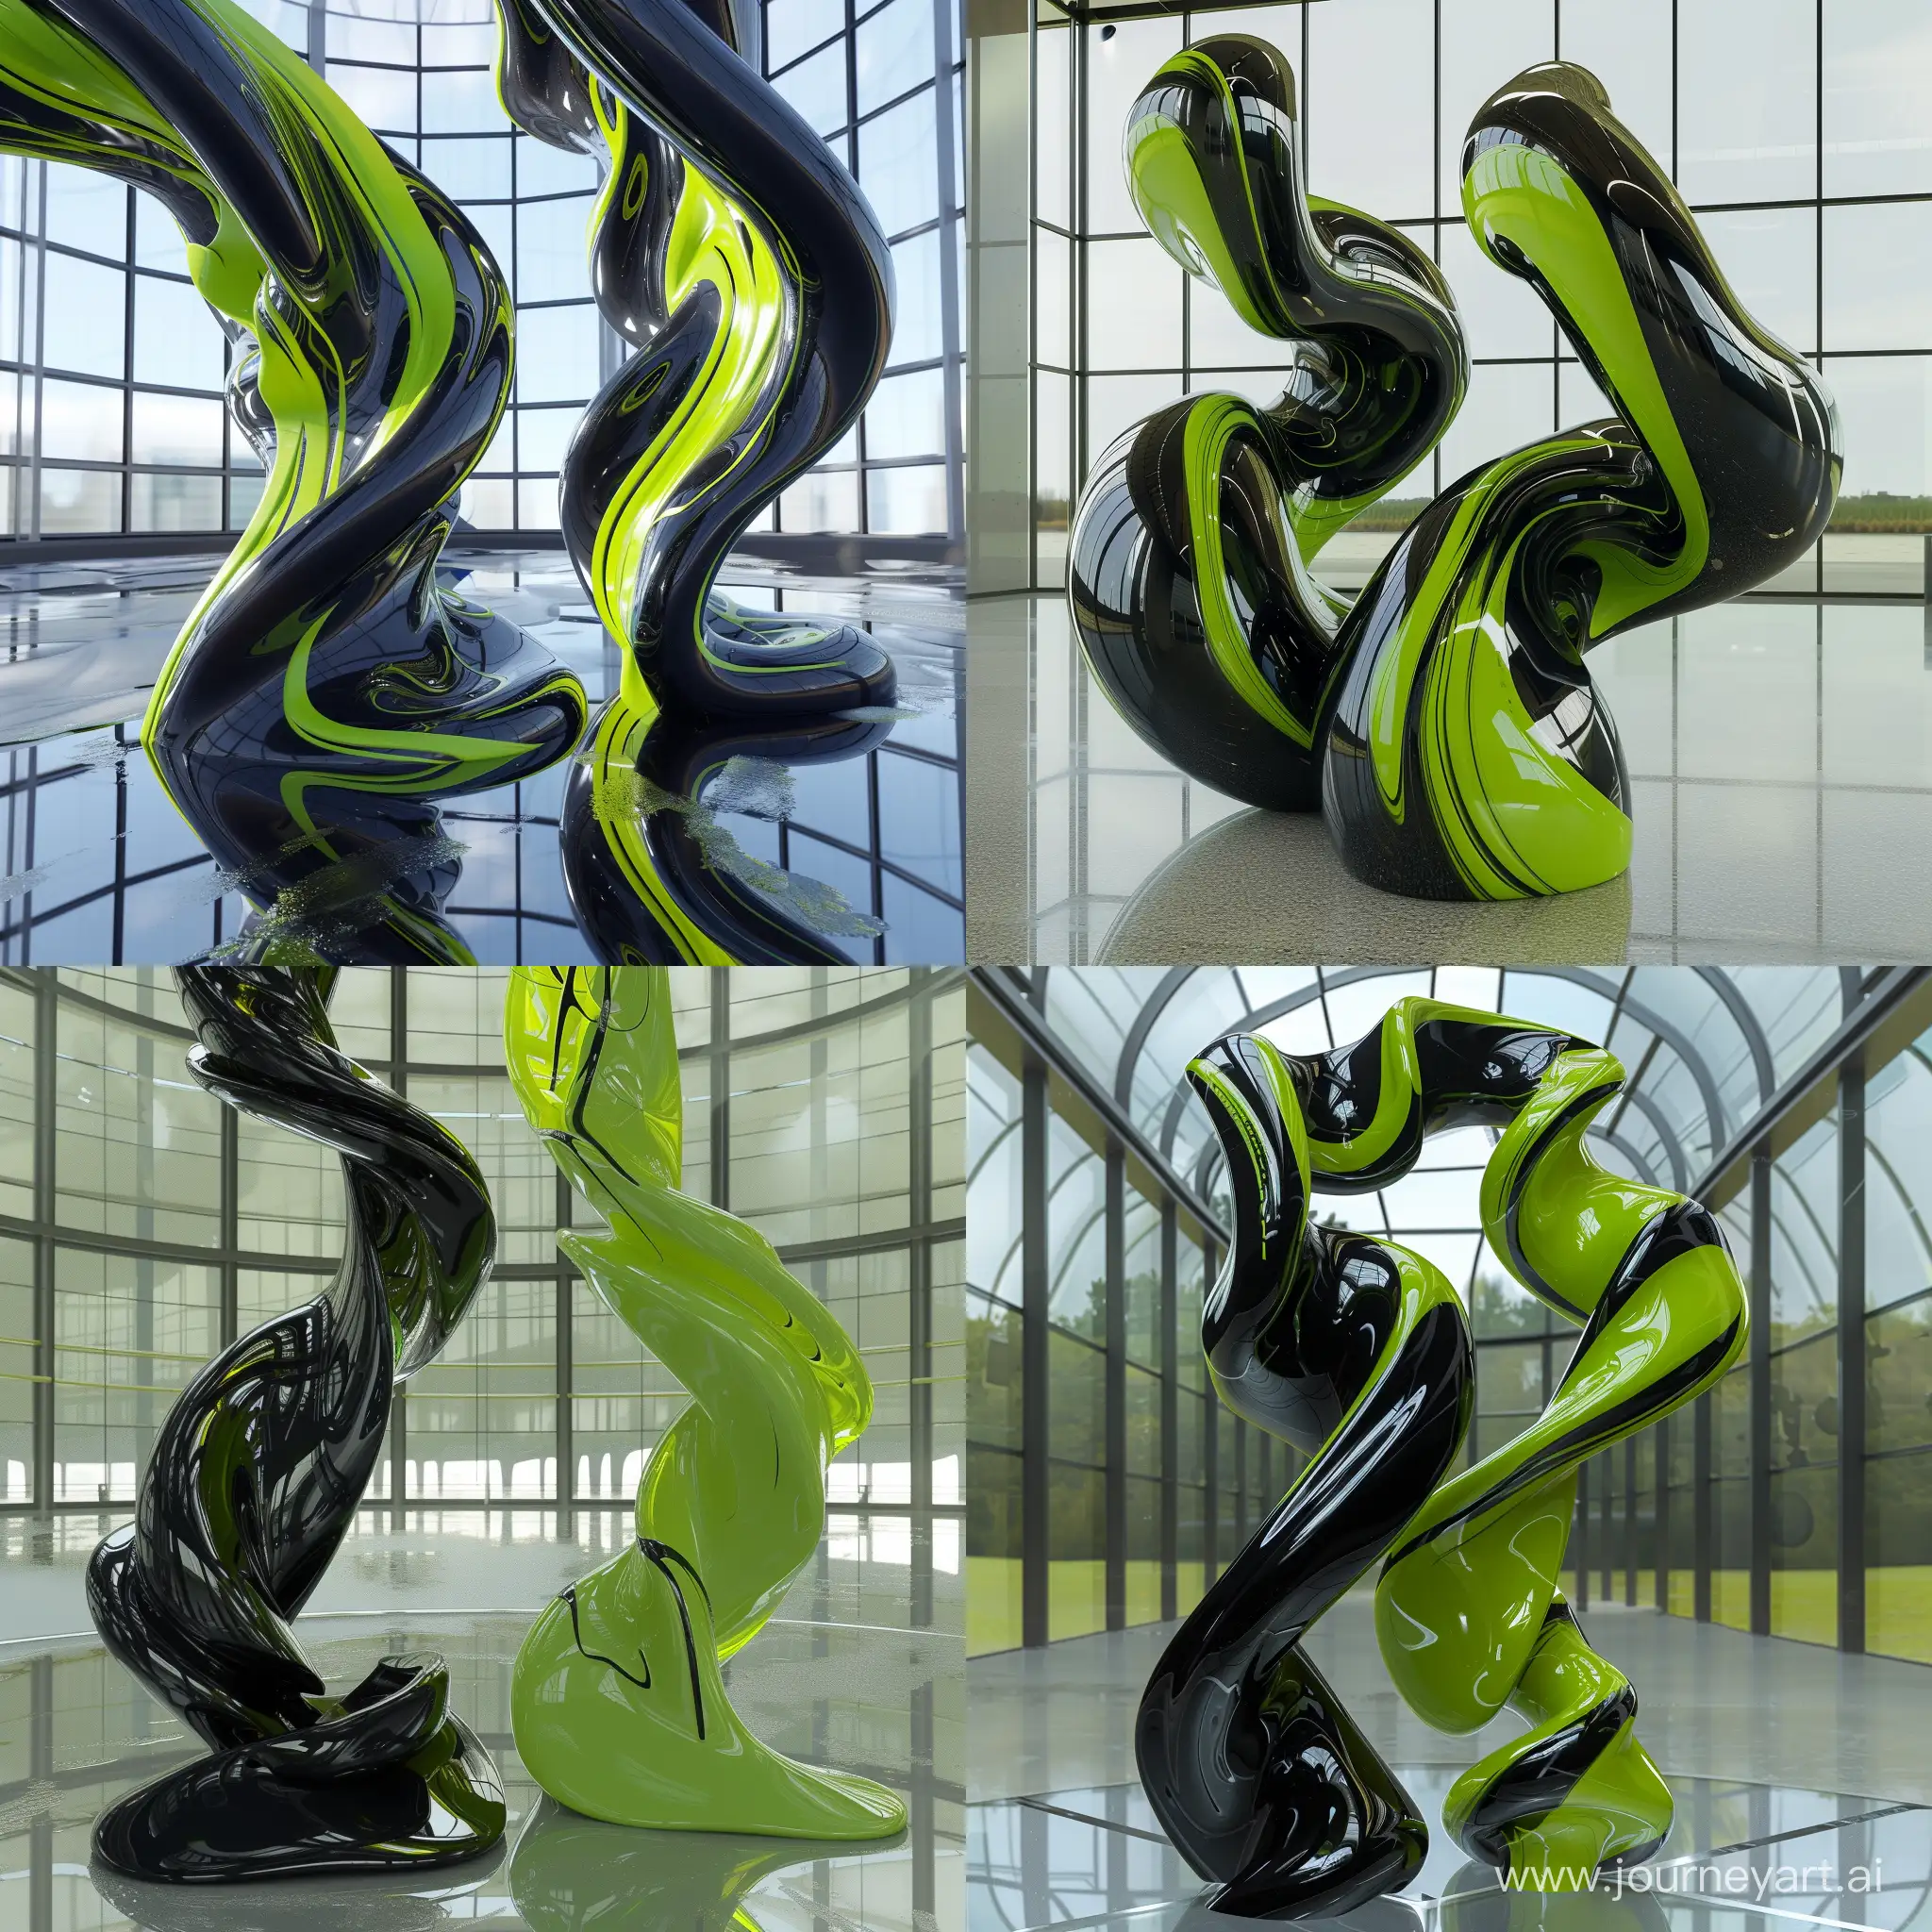 two hyper realistic obsidian glossy liquids of black and lime green paint twisting into each other in a big room made of glass, photo realistic, high resolution, unreal quality